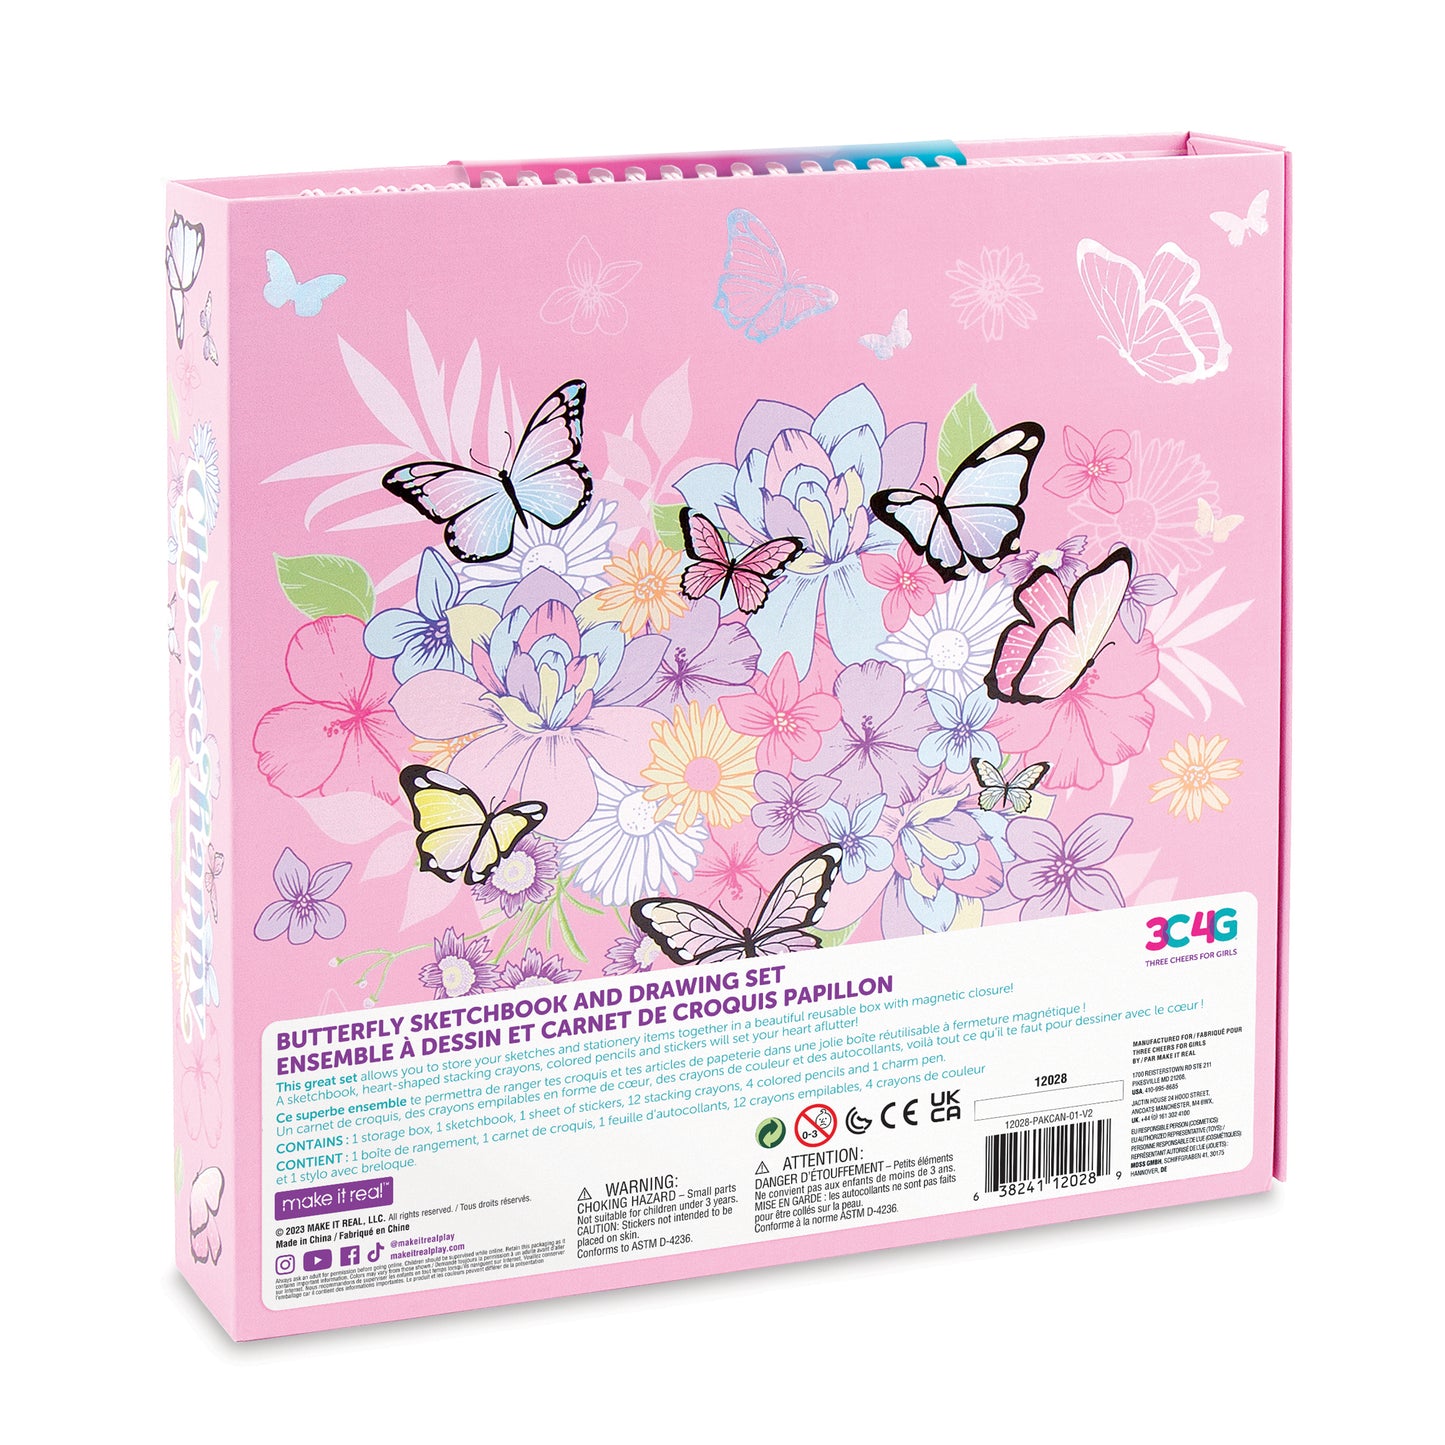 Butterfly Sketchbook and Drawing Set